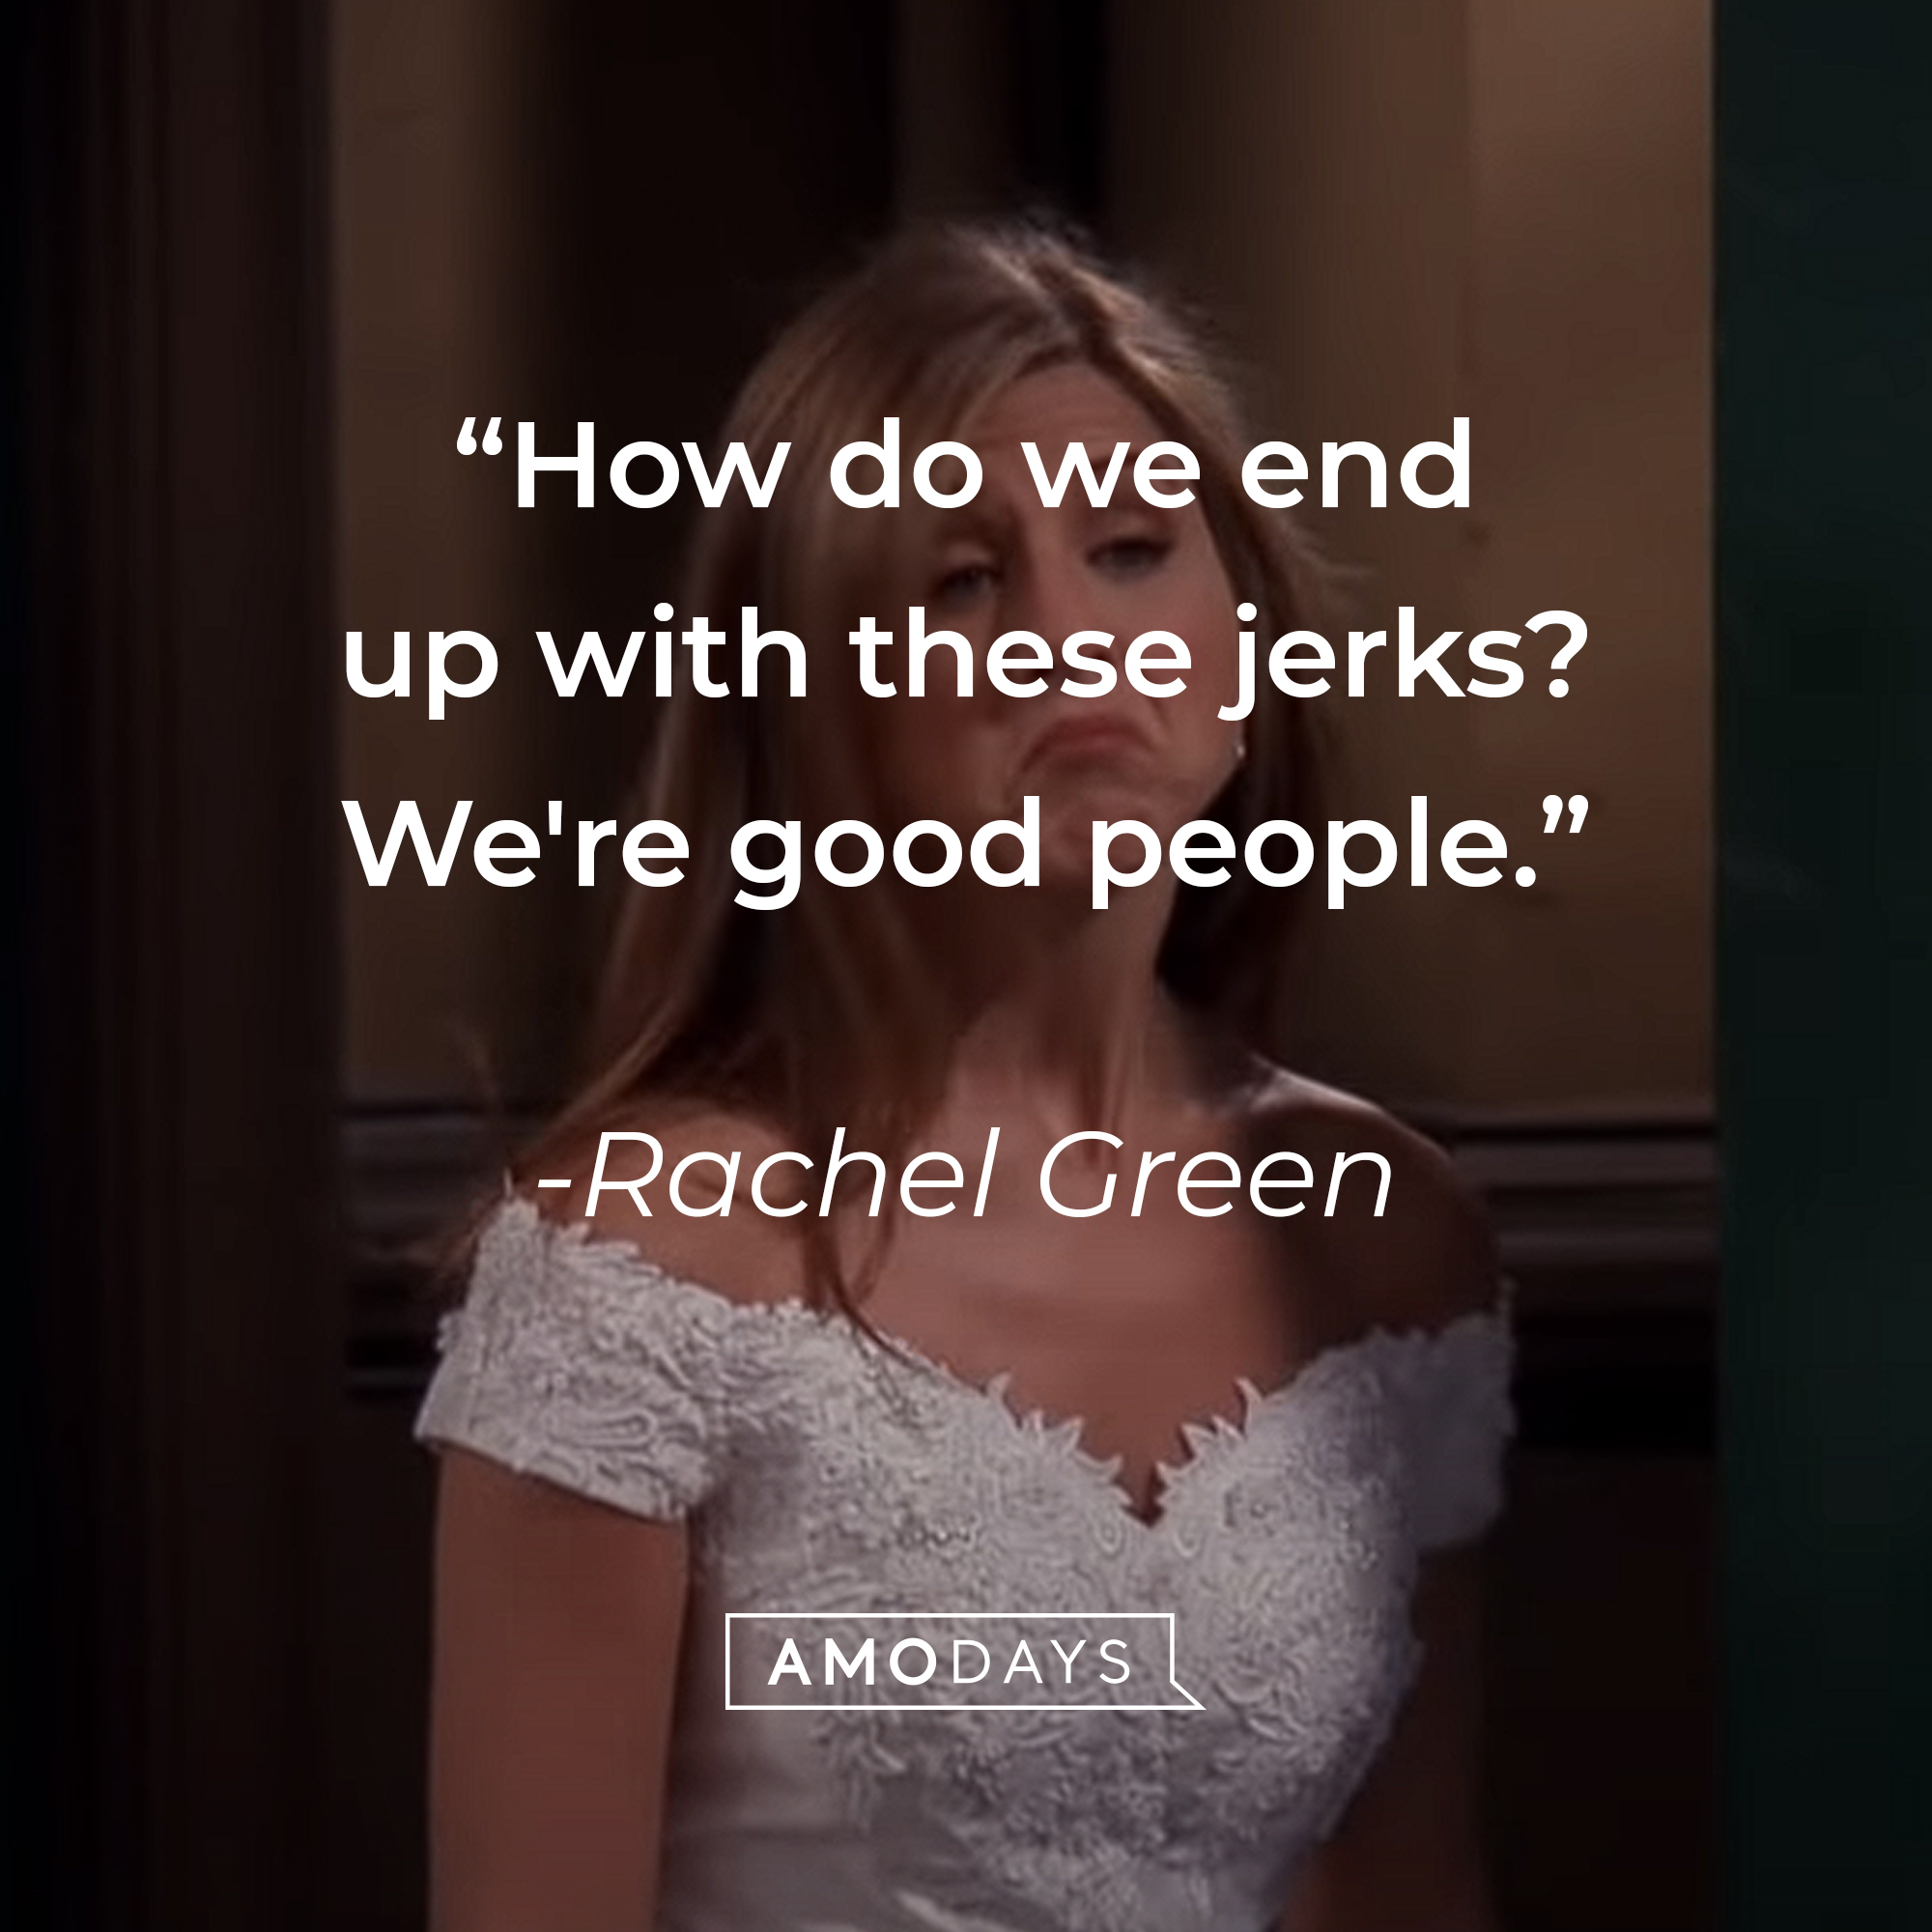 Rachel Green's quote: "How do we end up with these jerks? We're good people." | Source: youtube.com/warnerbrostv